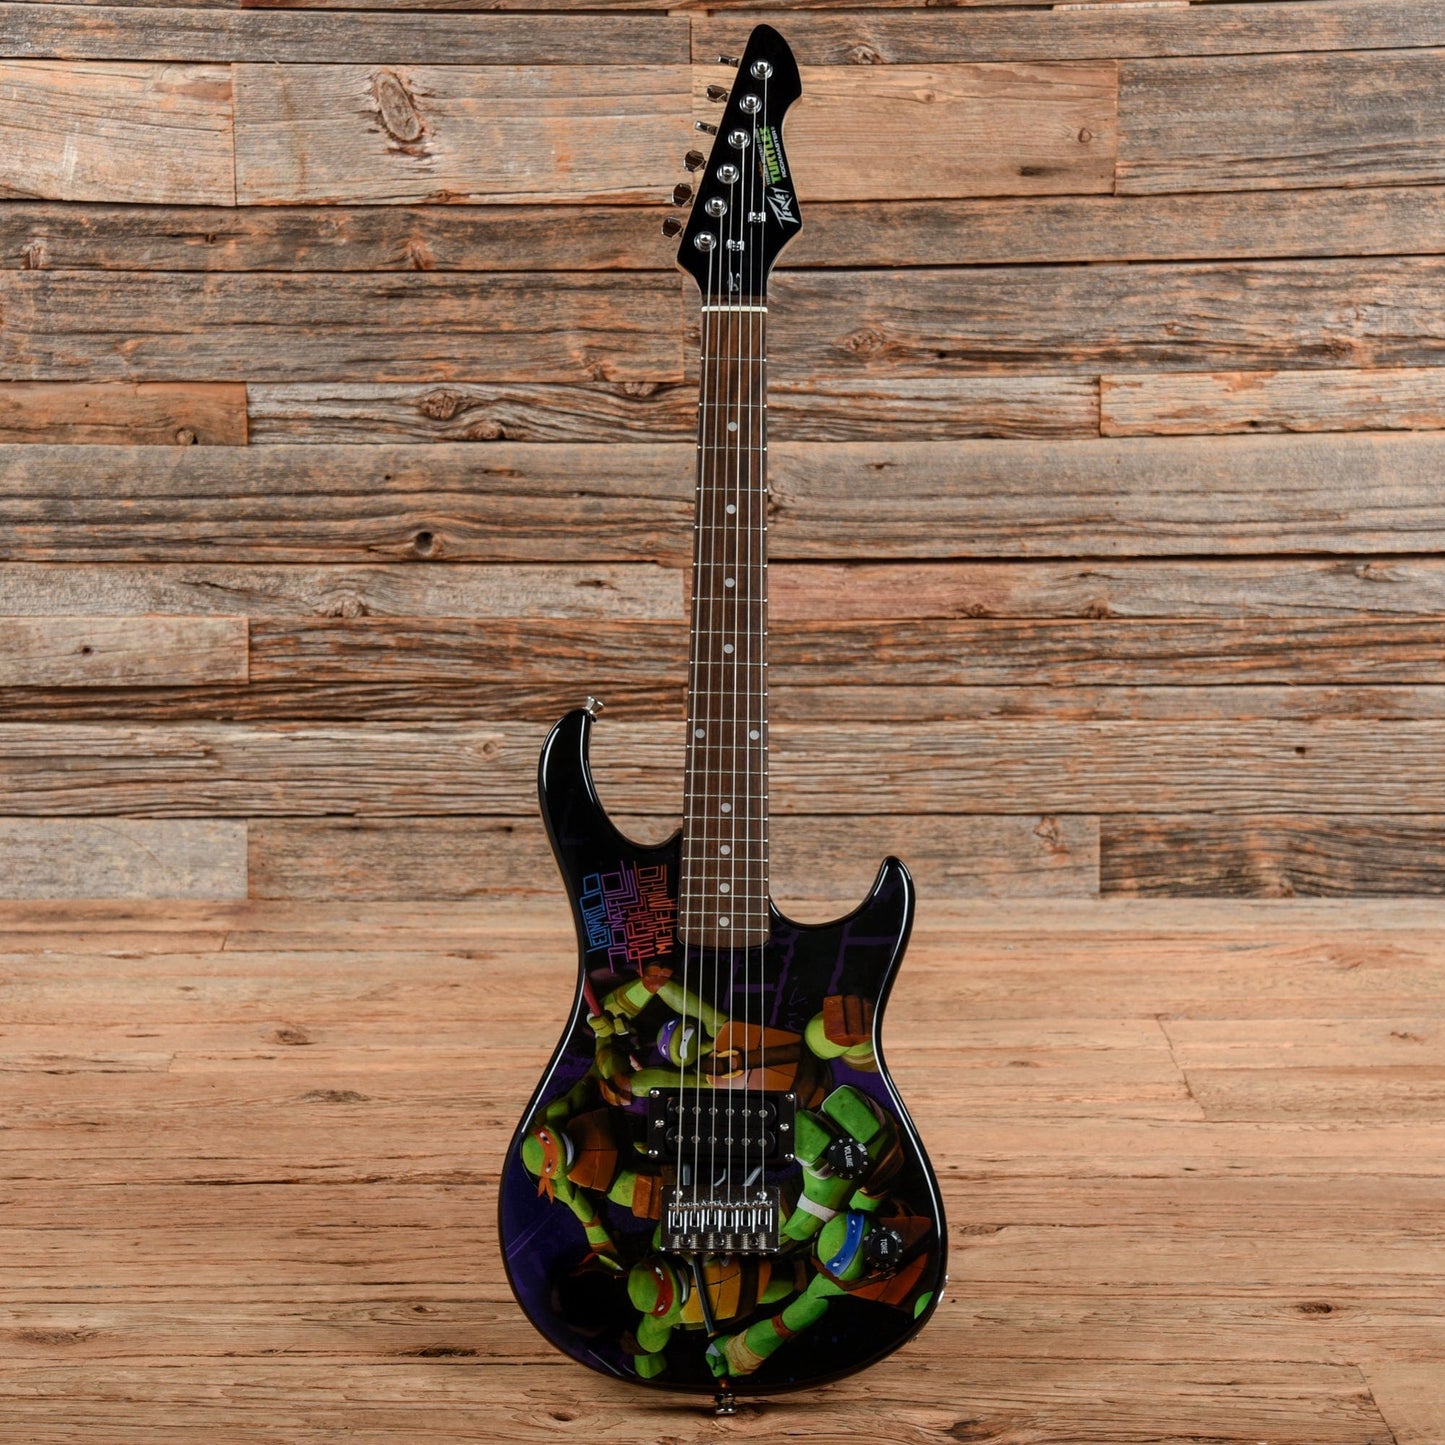 Peavey Rockmaster Black with Ninja Turtle Graphic Electric Guitars / Solid Body